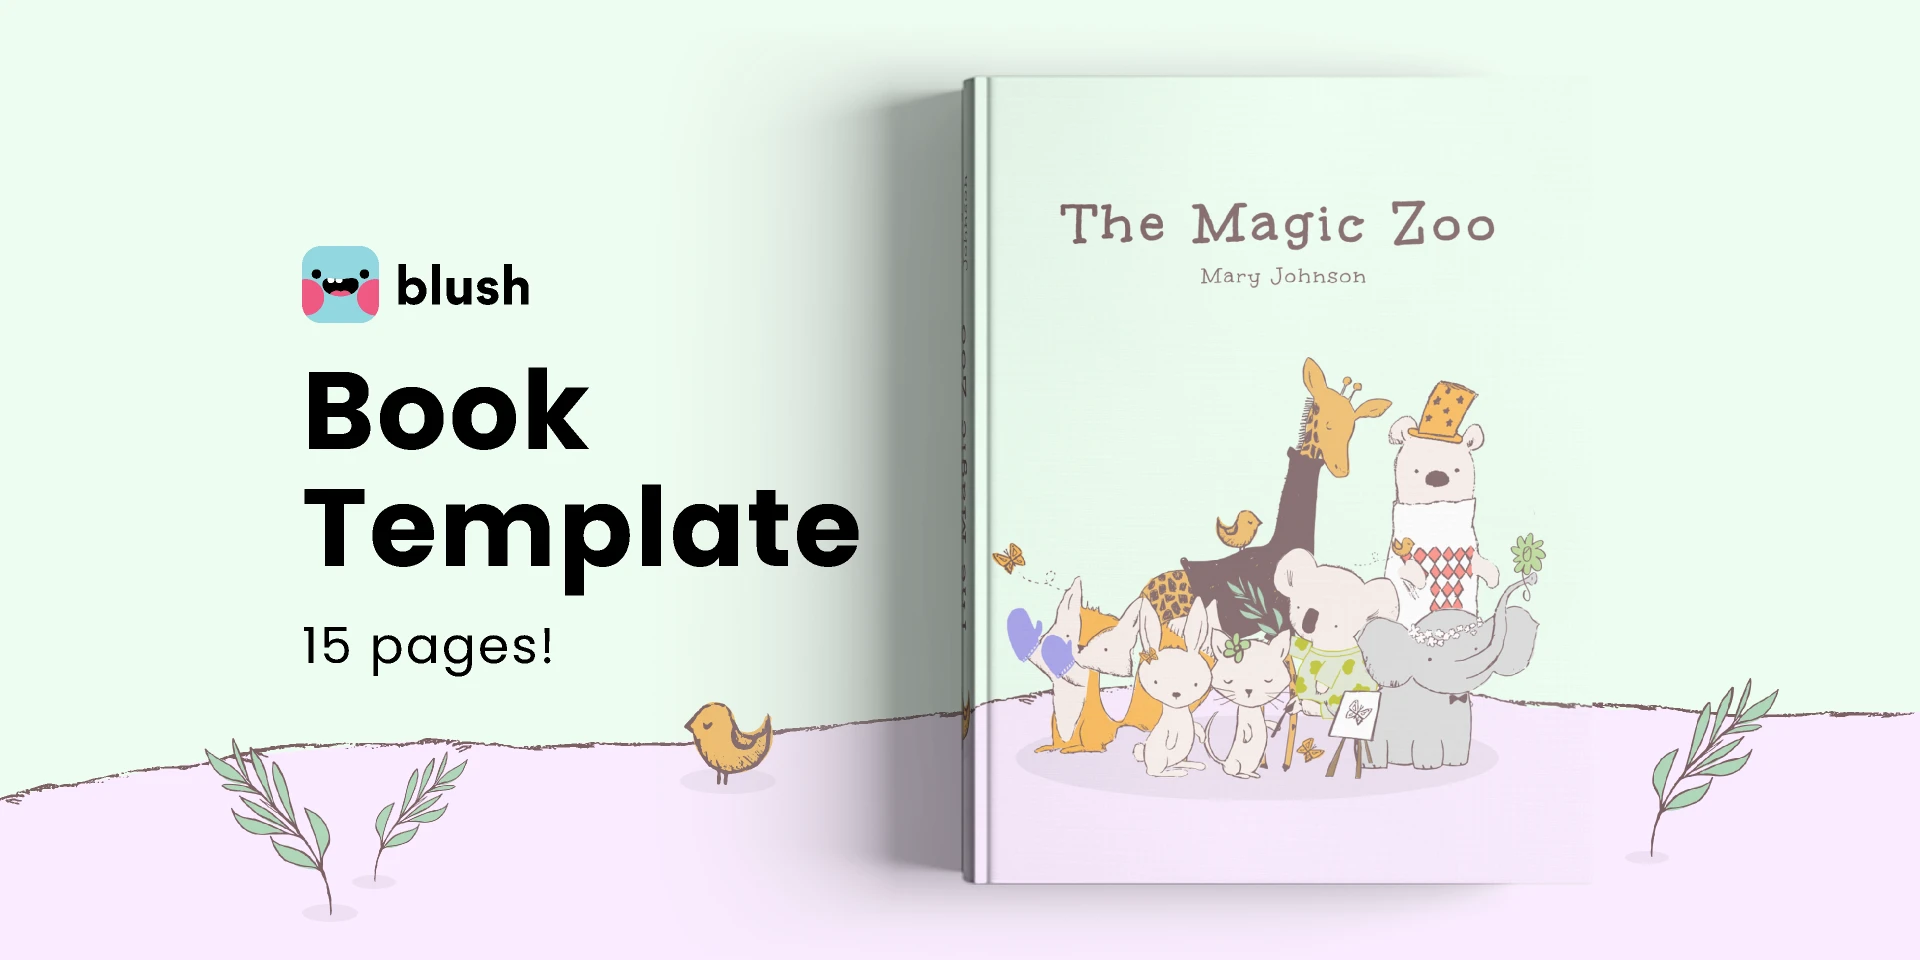 Book Template with Fuzzy Friends Illustrations for Figma and Adobe XD